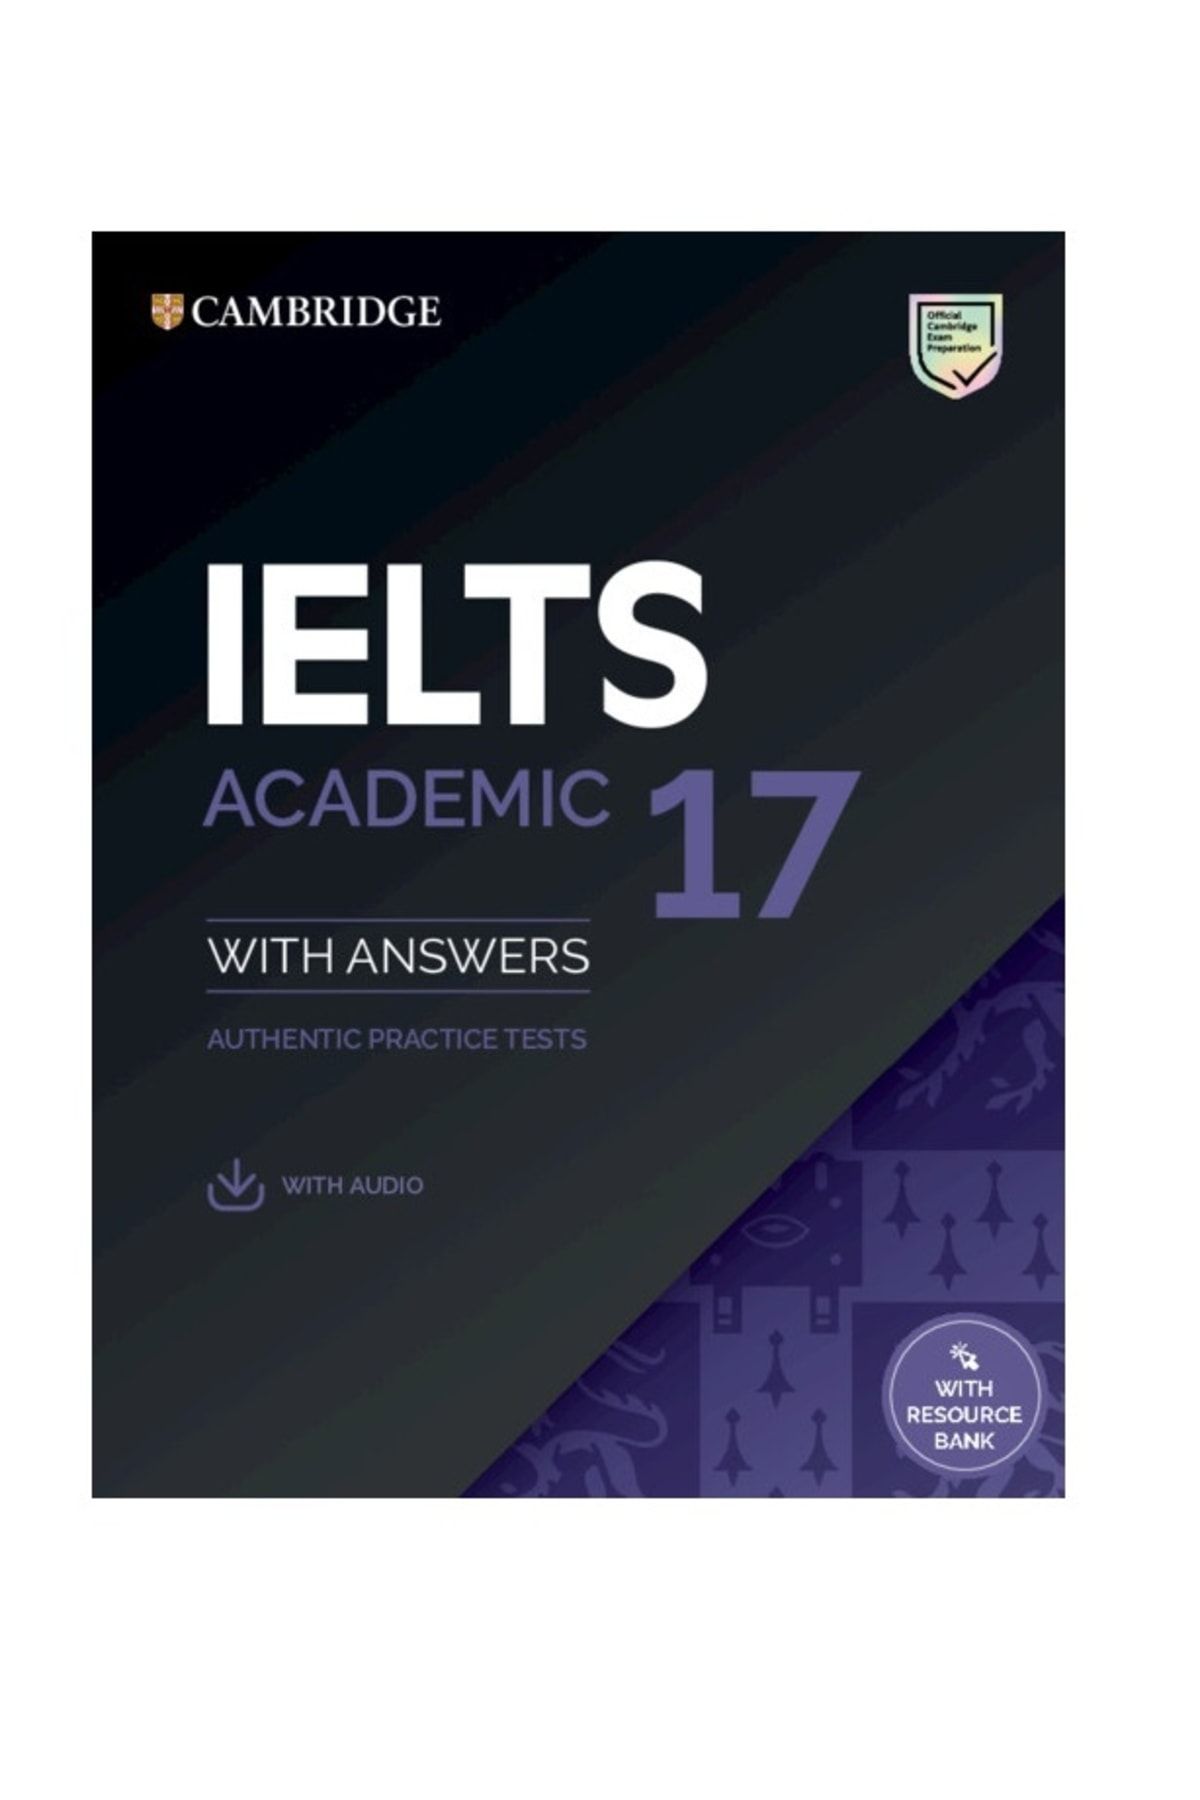 Cambridge University Ielts 17 Akademic Student's Book With Answers & Downloadable Audio